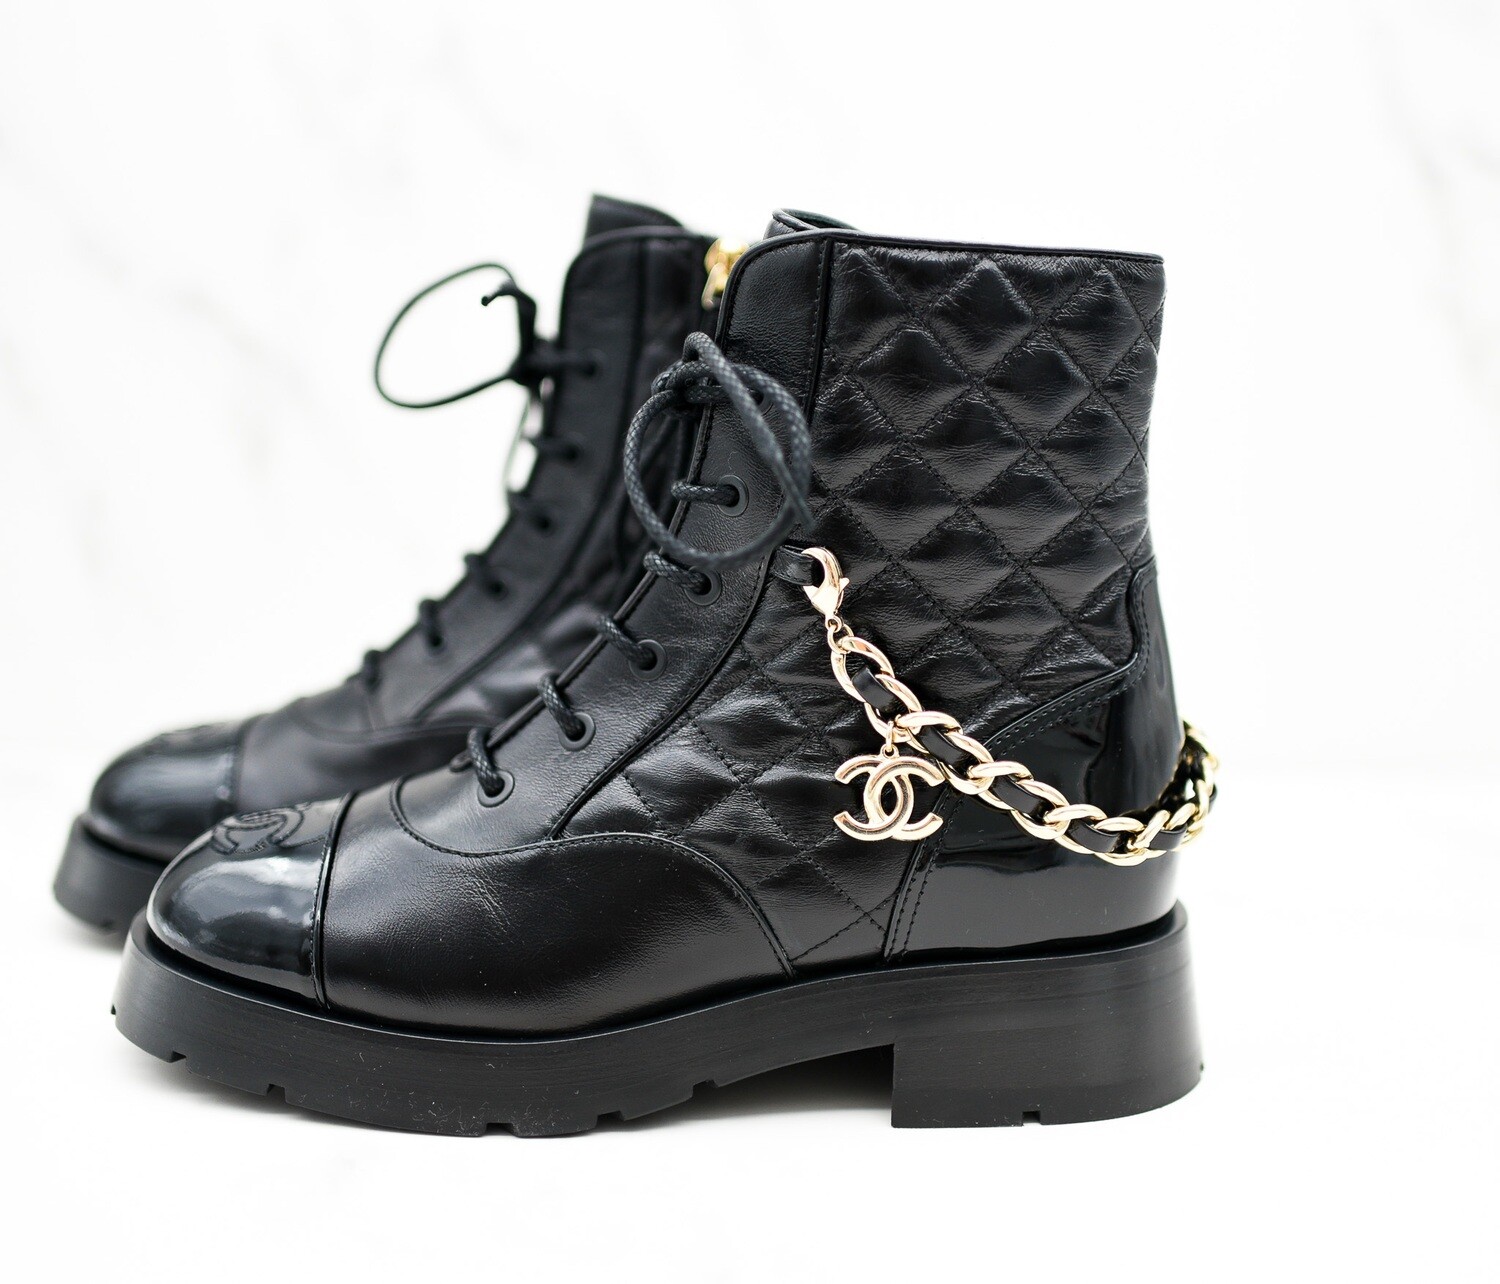 Chanel Quilted Combat Boots, Glazed Calfskin, Size 37, New in Box